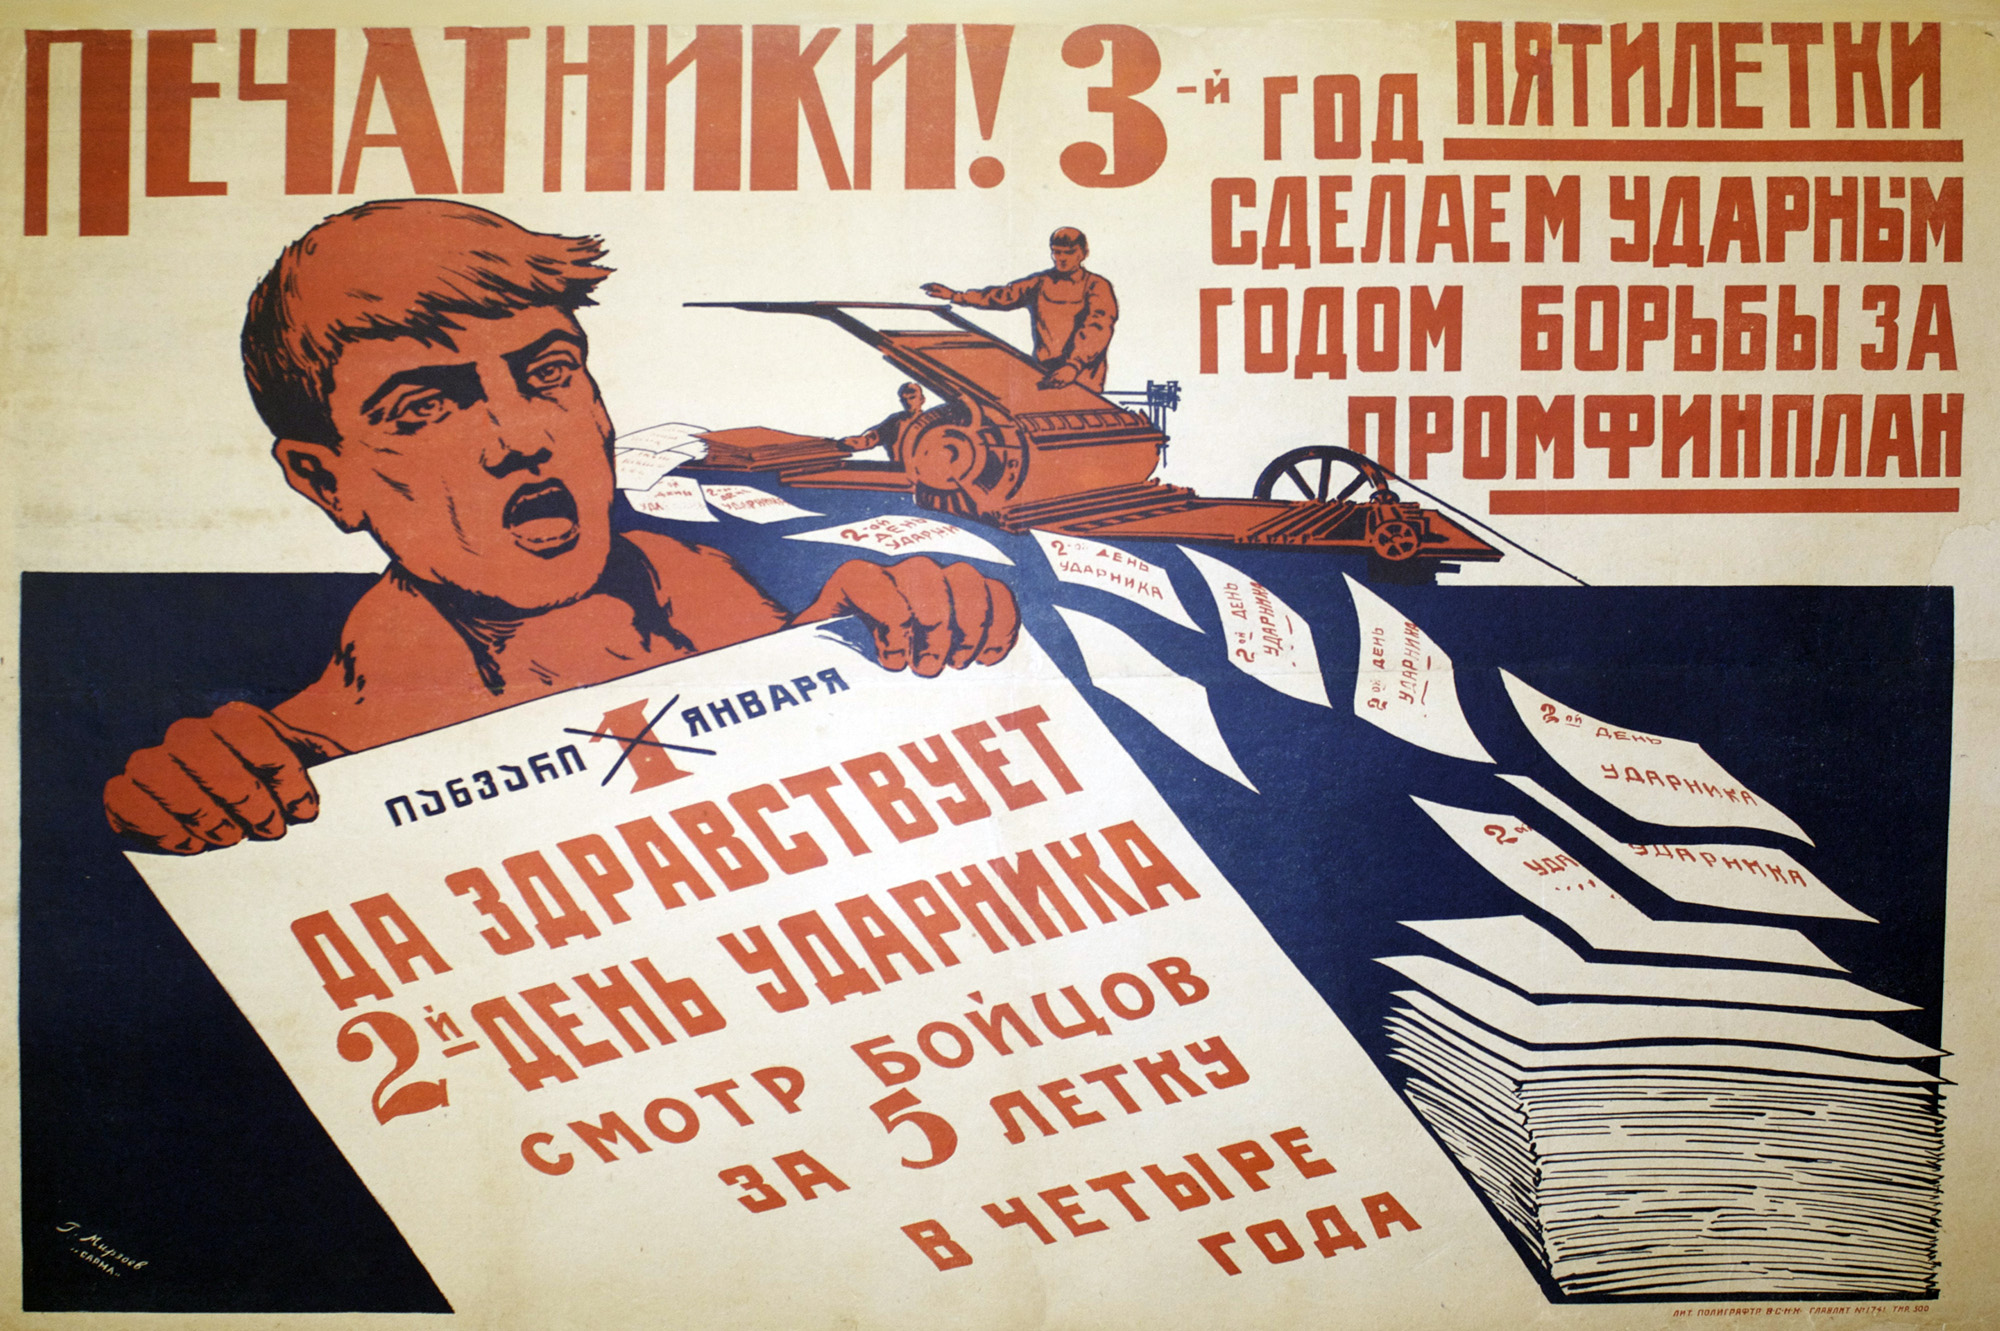 Printers!
Let’s make the Third Year of the Five-Year Plan a Shock-Worker Year by Fighting to Fulfill the Promfinplan'.
January 1st [written n Russian and in Georgian]. 
Long Live the 2nd Day of the Shock-Worker. 
Review of Fighters who Should Fulfill the Five-Year Plan in Four Years